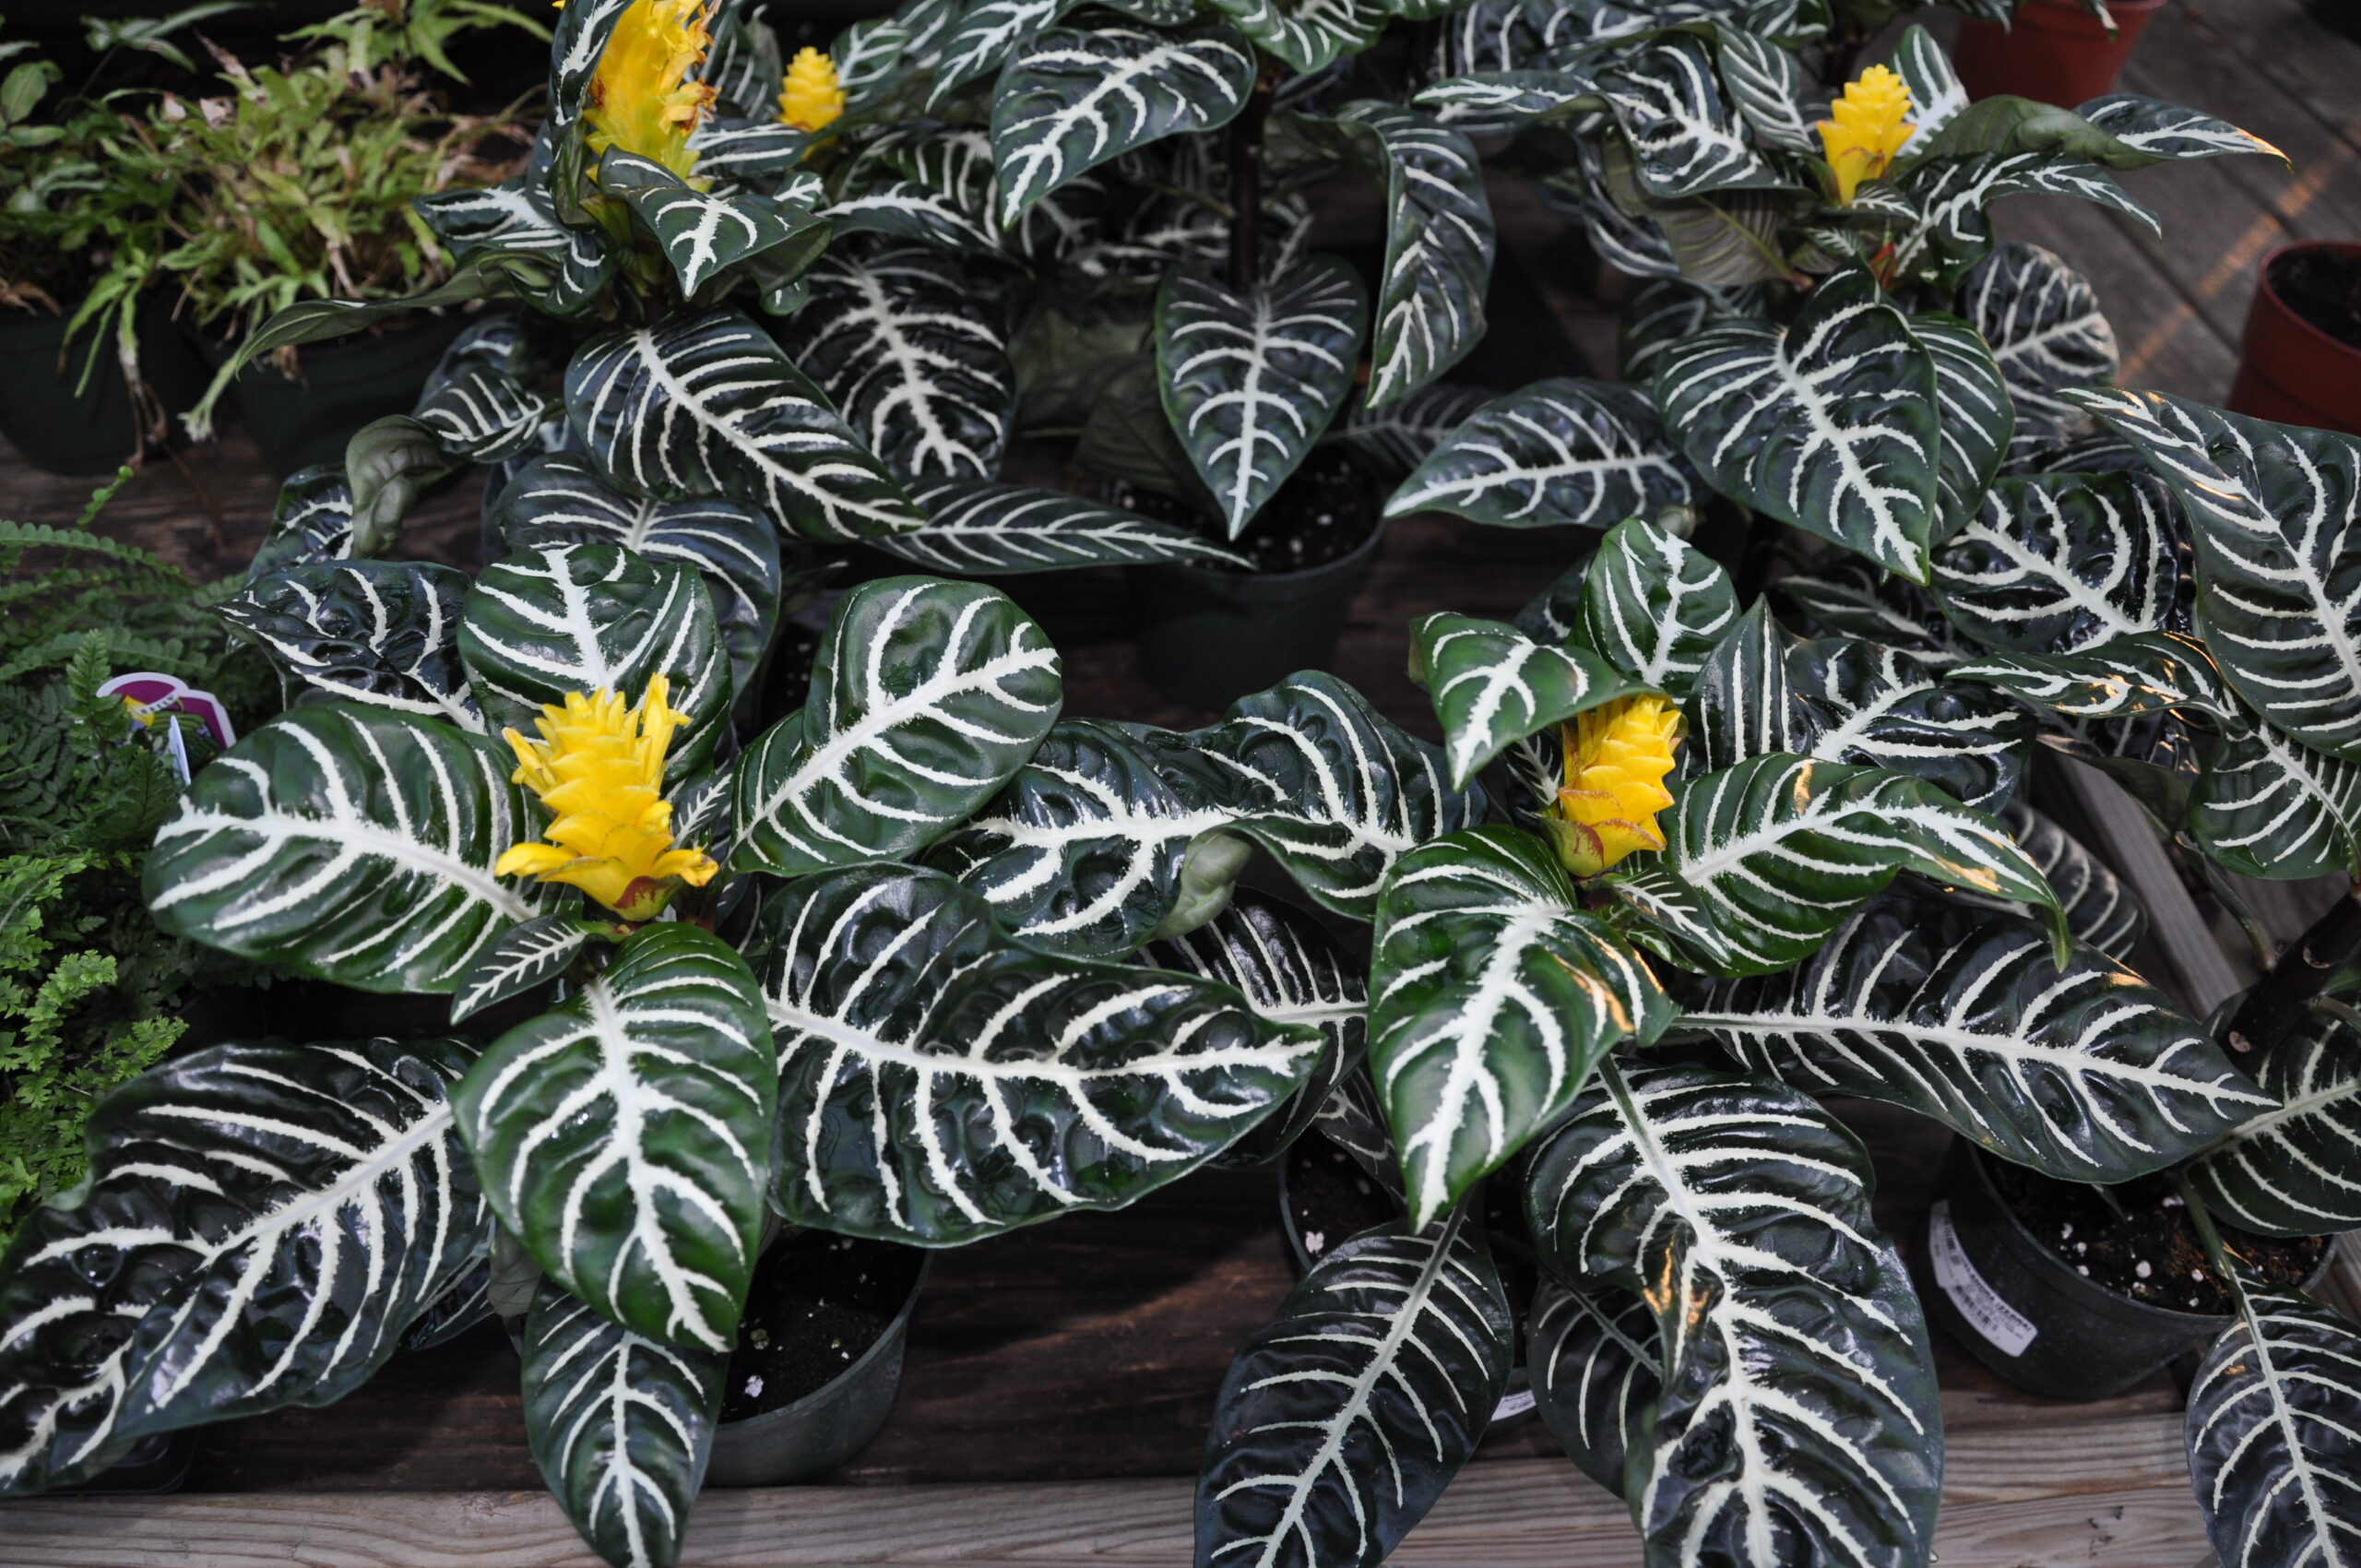 The Zebra Plant (Aphelandra squarrosa) is from Brazil and often sold up here as a houseplant. It can look stunning, but if overwatered it rots, and if grown too cold it drops its leaves. One of the worst plants for beginners and worst as a houseplant -- unless you’re in Florida.
ANDREW MESSINGER